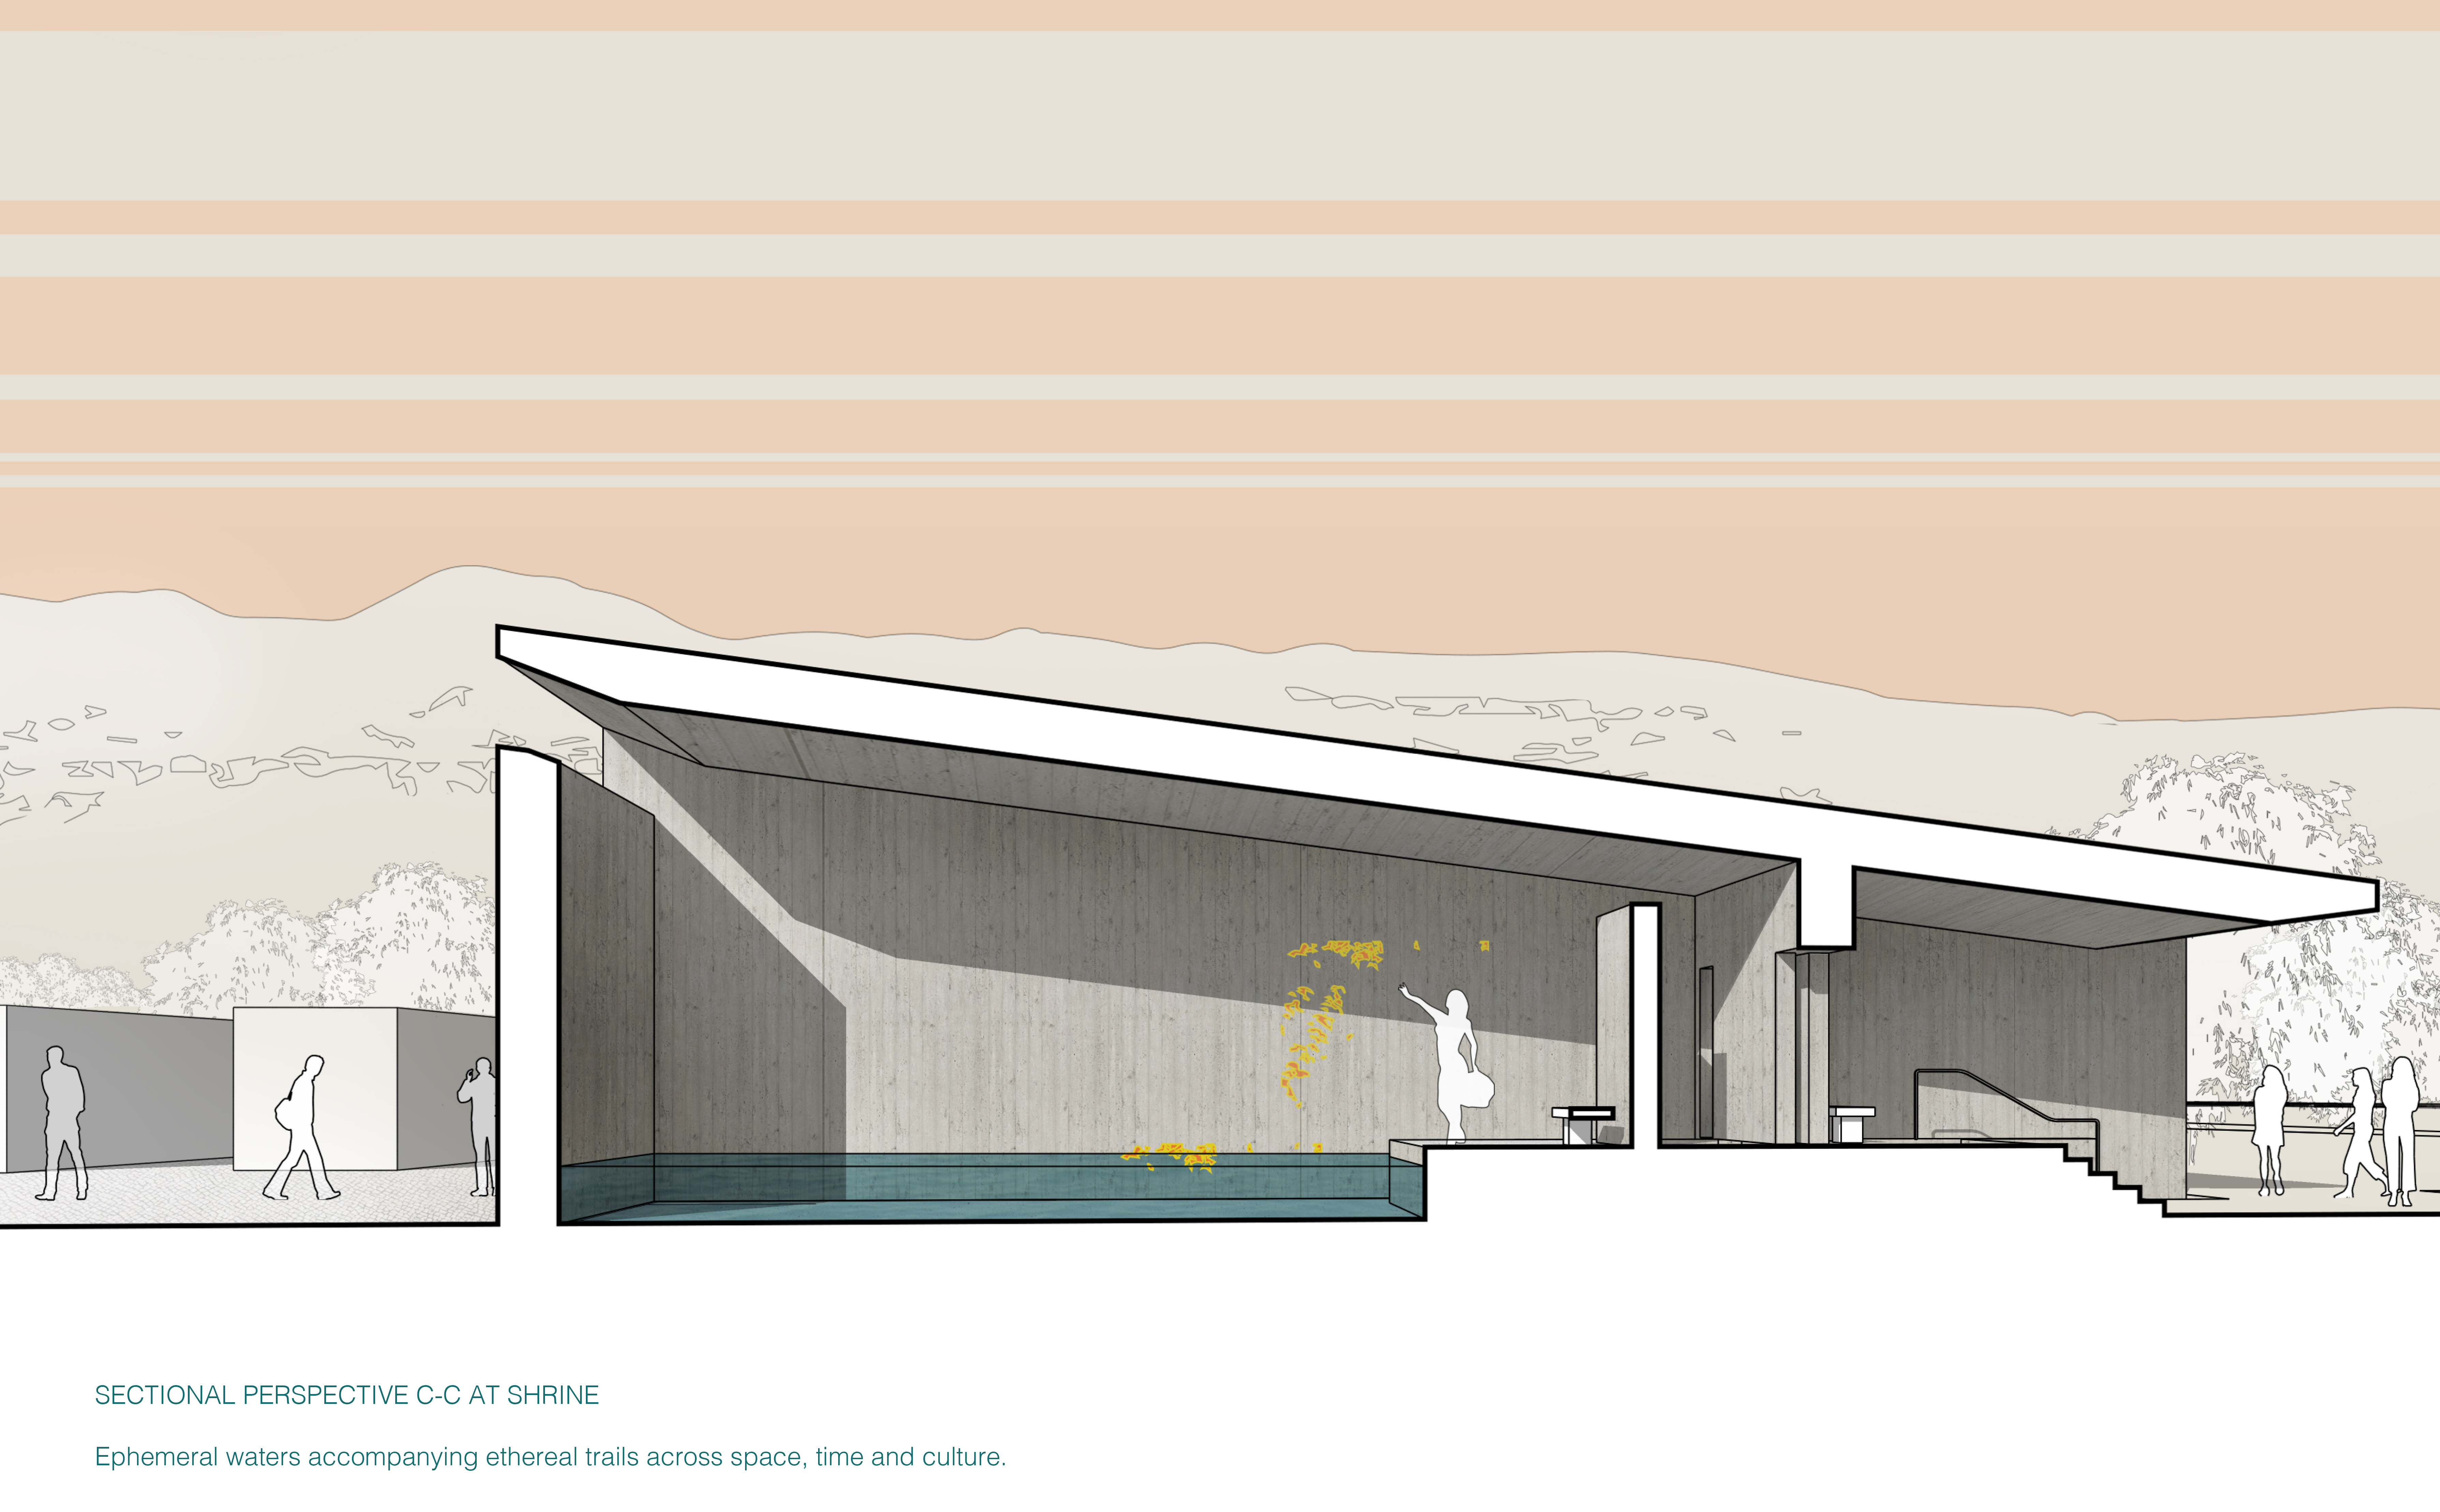 architectural drawing of the side view of a building with an indoor pool